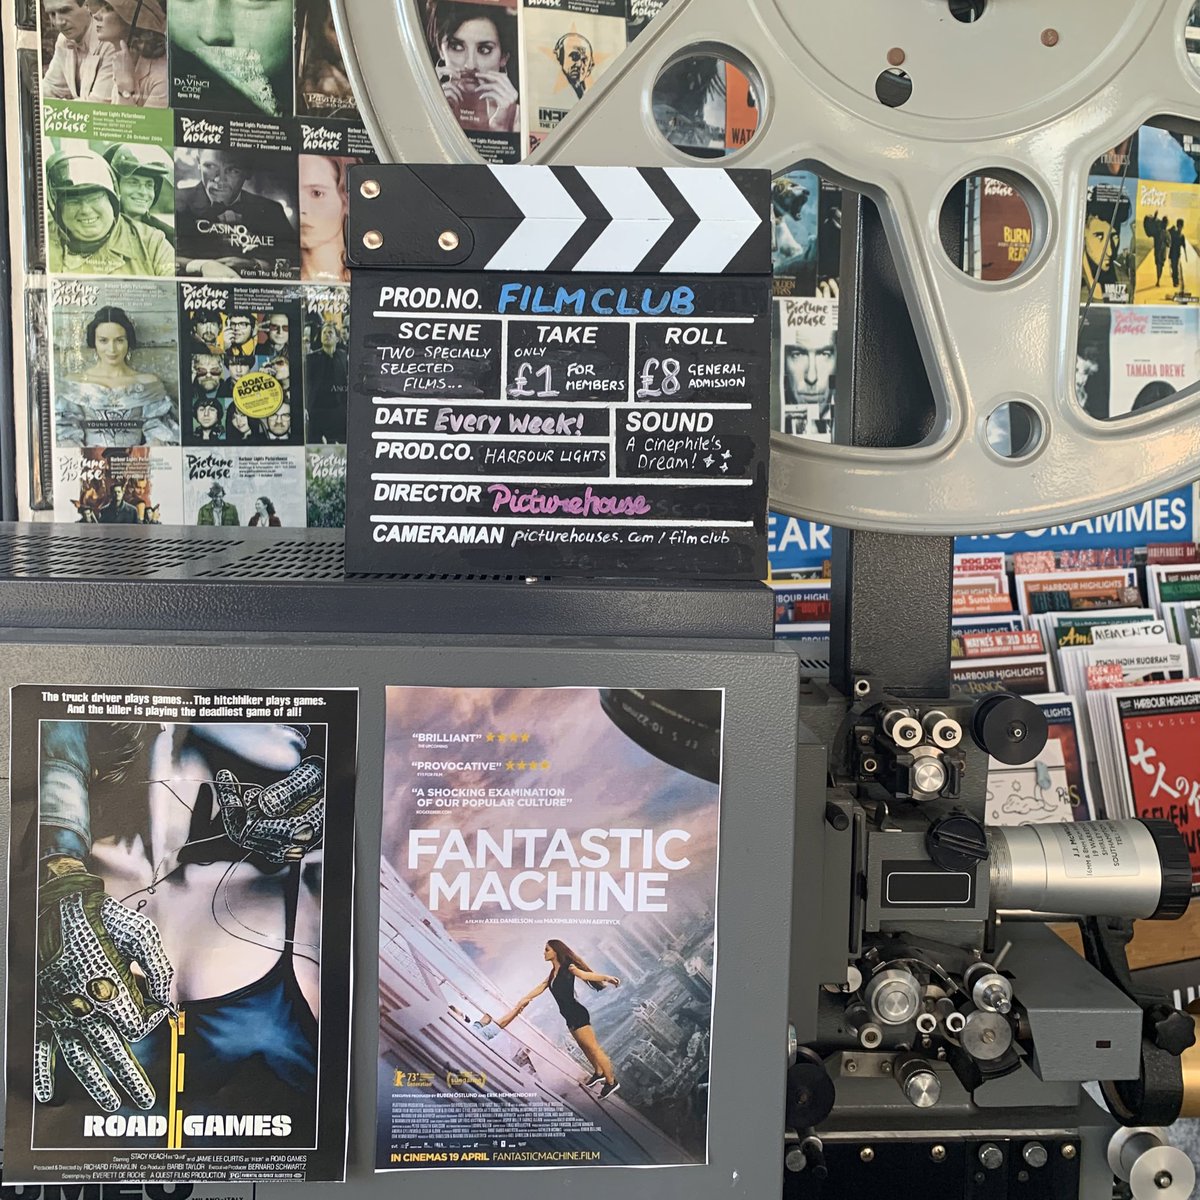 🎬 Next Week in #FilmClub… 🚙 #RoadGames - an 80s cat and mouse thriller (Mon 6 May, 20.15) 🎥 @picentfilms’ fascinating new documentary, #FantasticMachine (Tue 7 May, 20.30 - followed by a recorded Q&A) ✨ £1 Members! 🎟️ £8 General Admission 👉🏻 picturehouses.com/filmclub